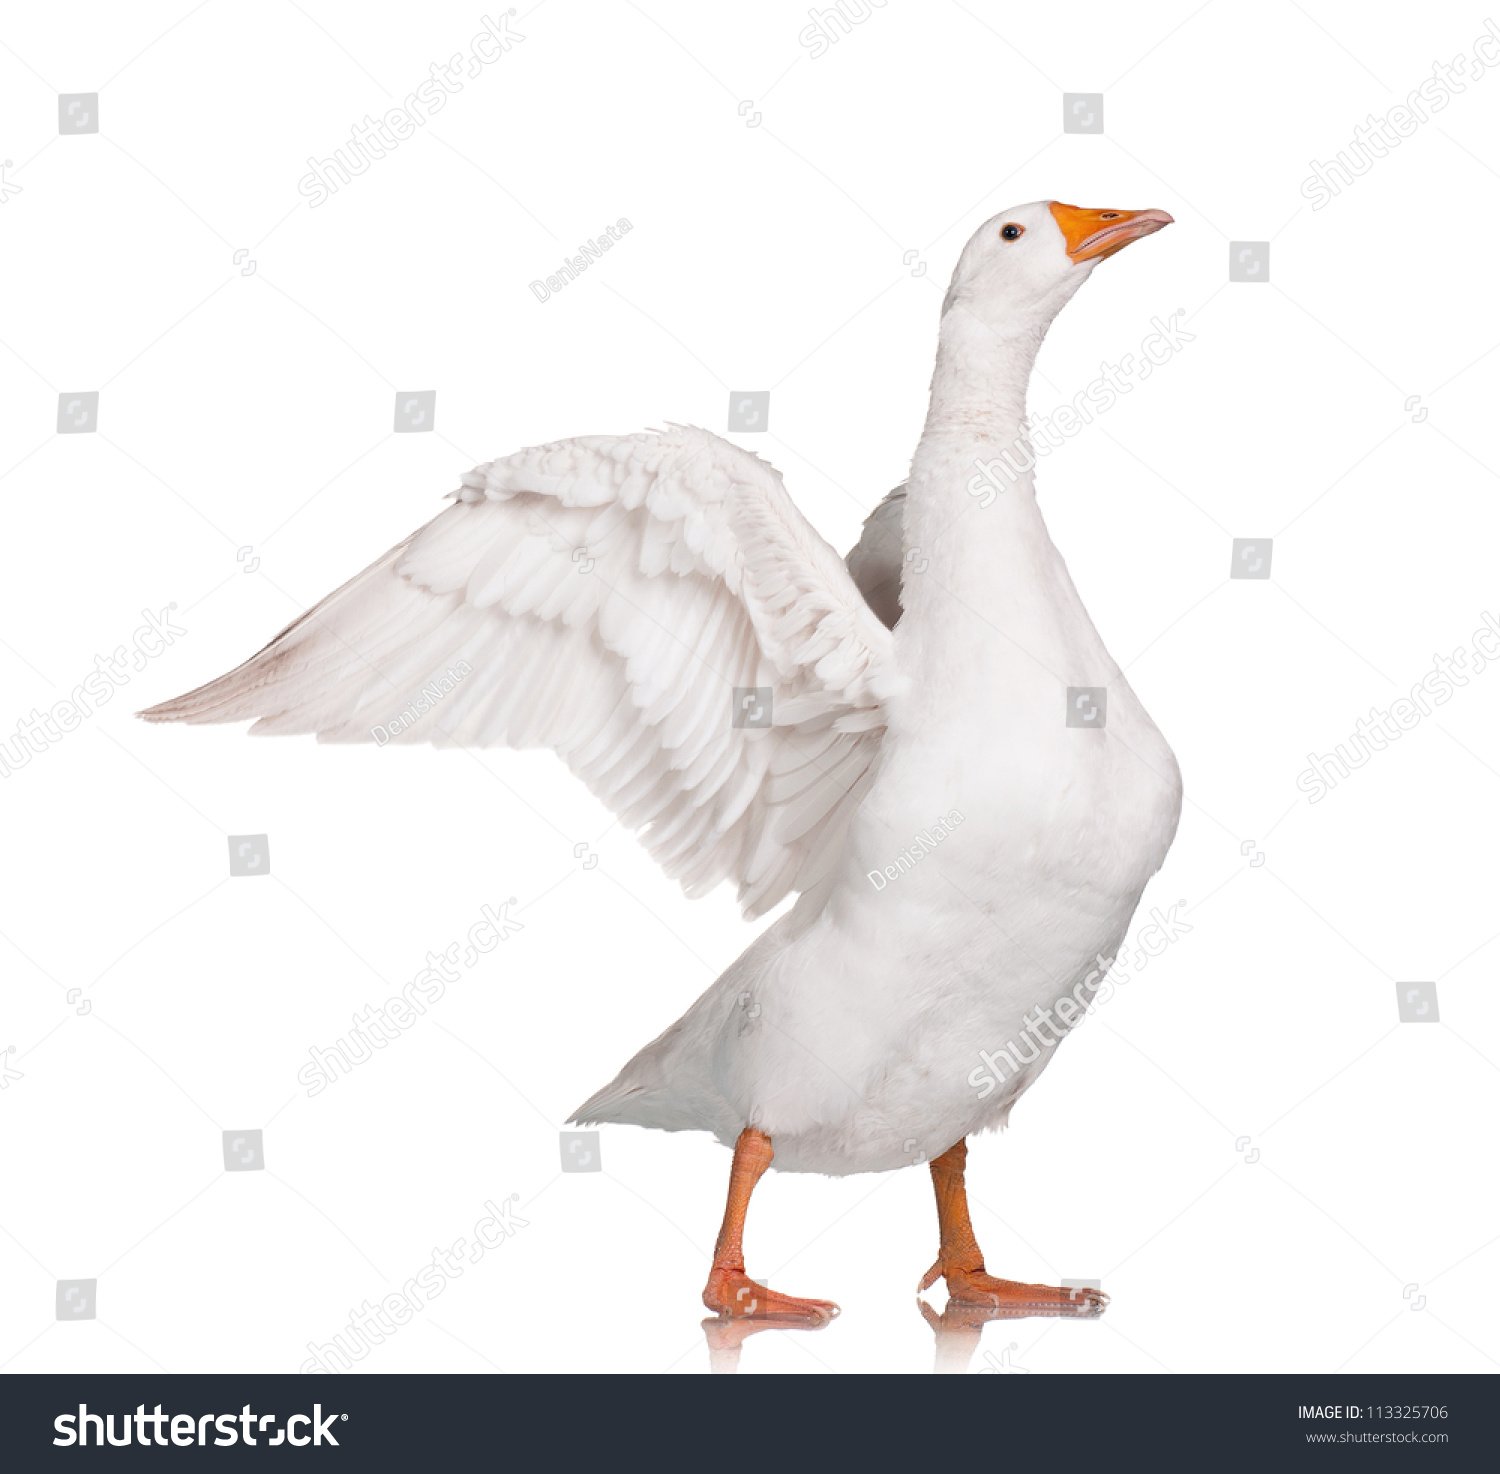 White domestic goose isolated on white background #113325706